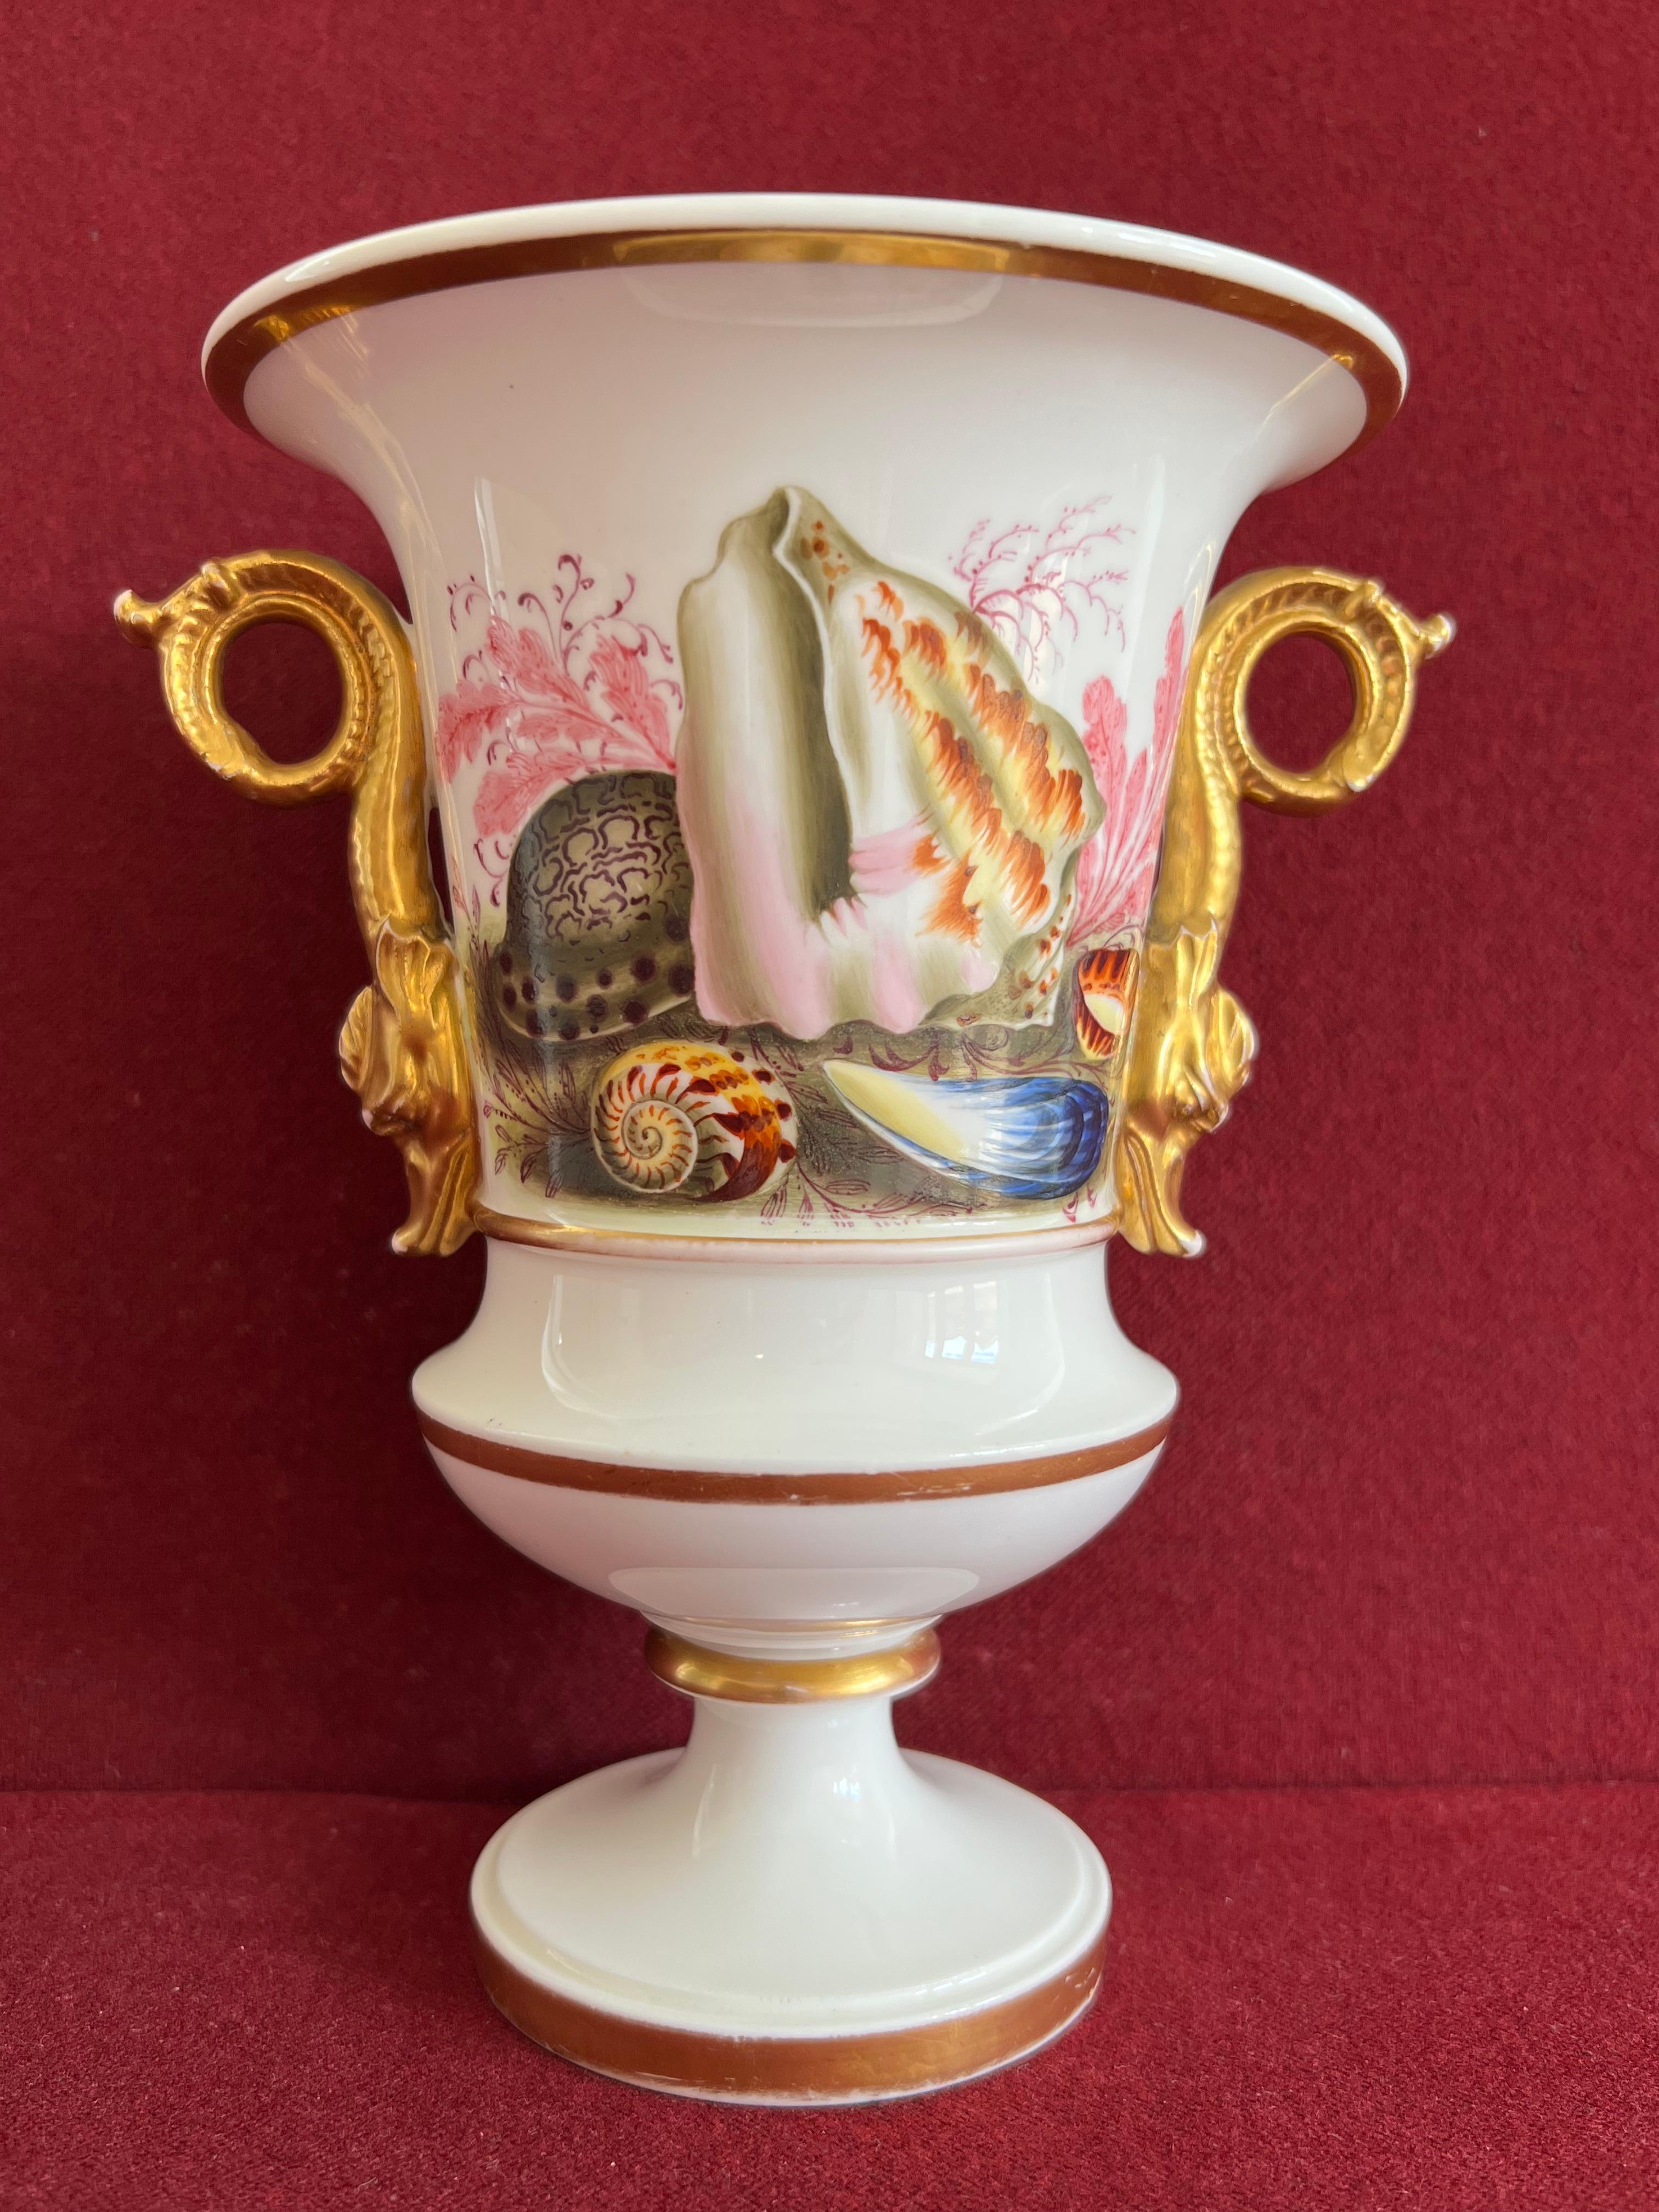 An incredibly beautiful and rare Spode porcelain vase decorated with shells to the front and flowers to the reverse.

The shape name is 